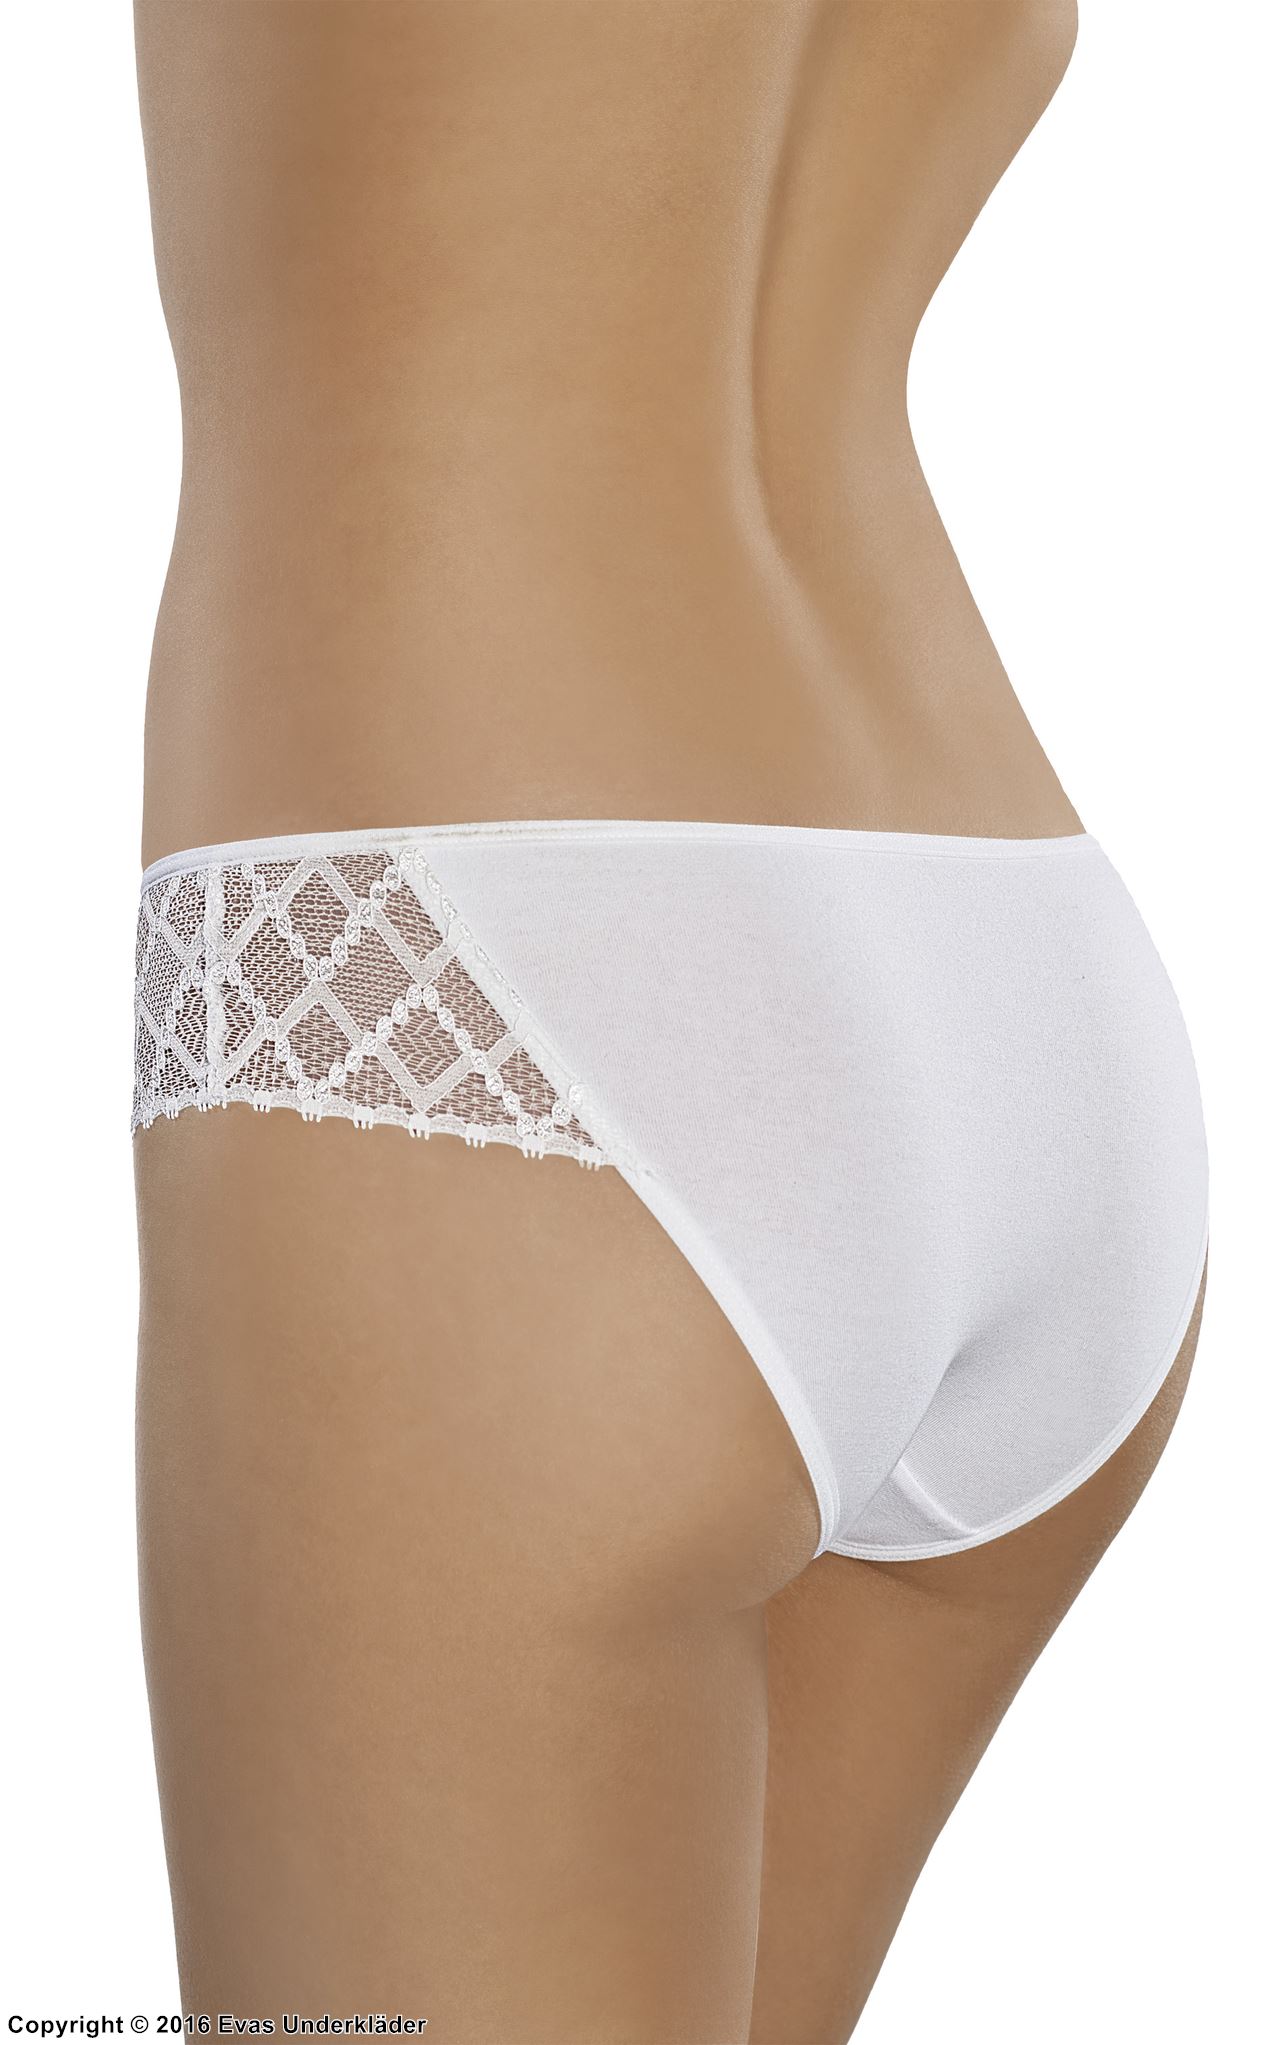 Classic briefs, high quality cotton, lace overlay